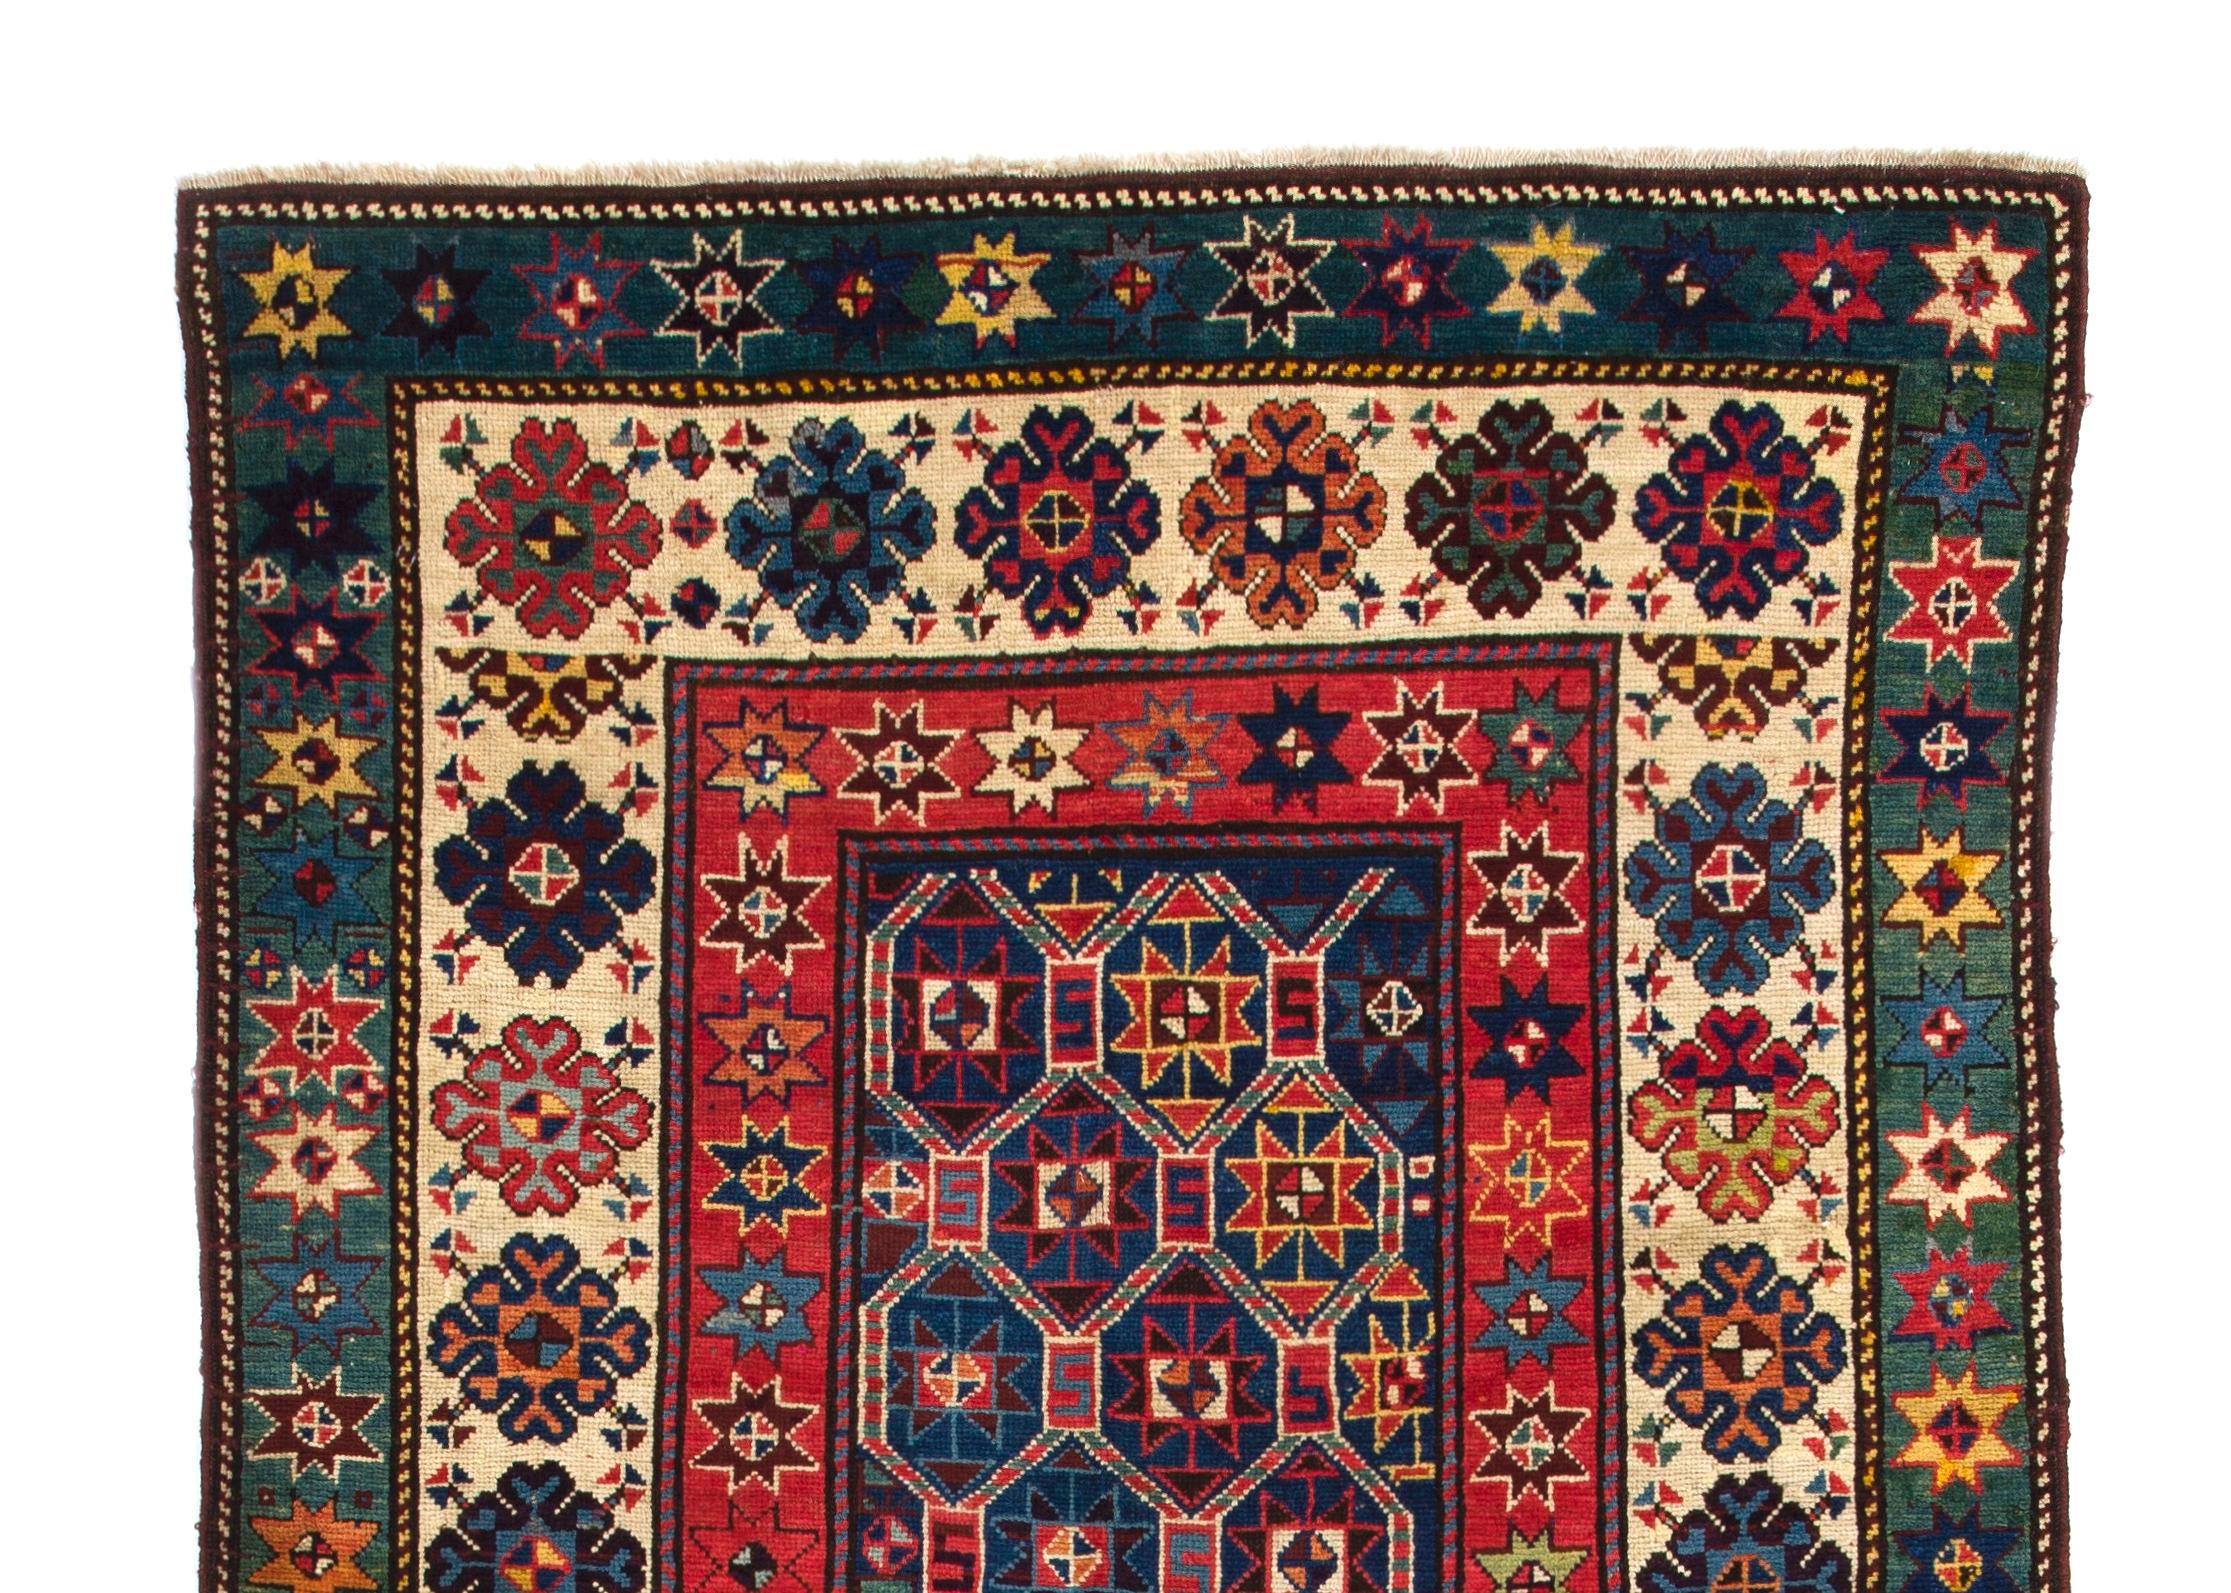 An unusual antique Talish long rug from late 19th century from the Caspian coast of South East Azerbaijan. Talish rugs are named after the tribe that live in this territory and weave rugs with this distinctive style and design that generally